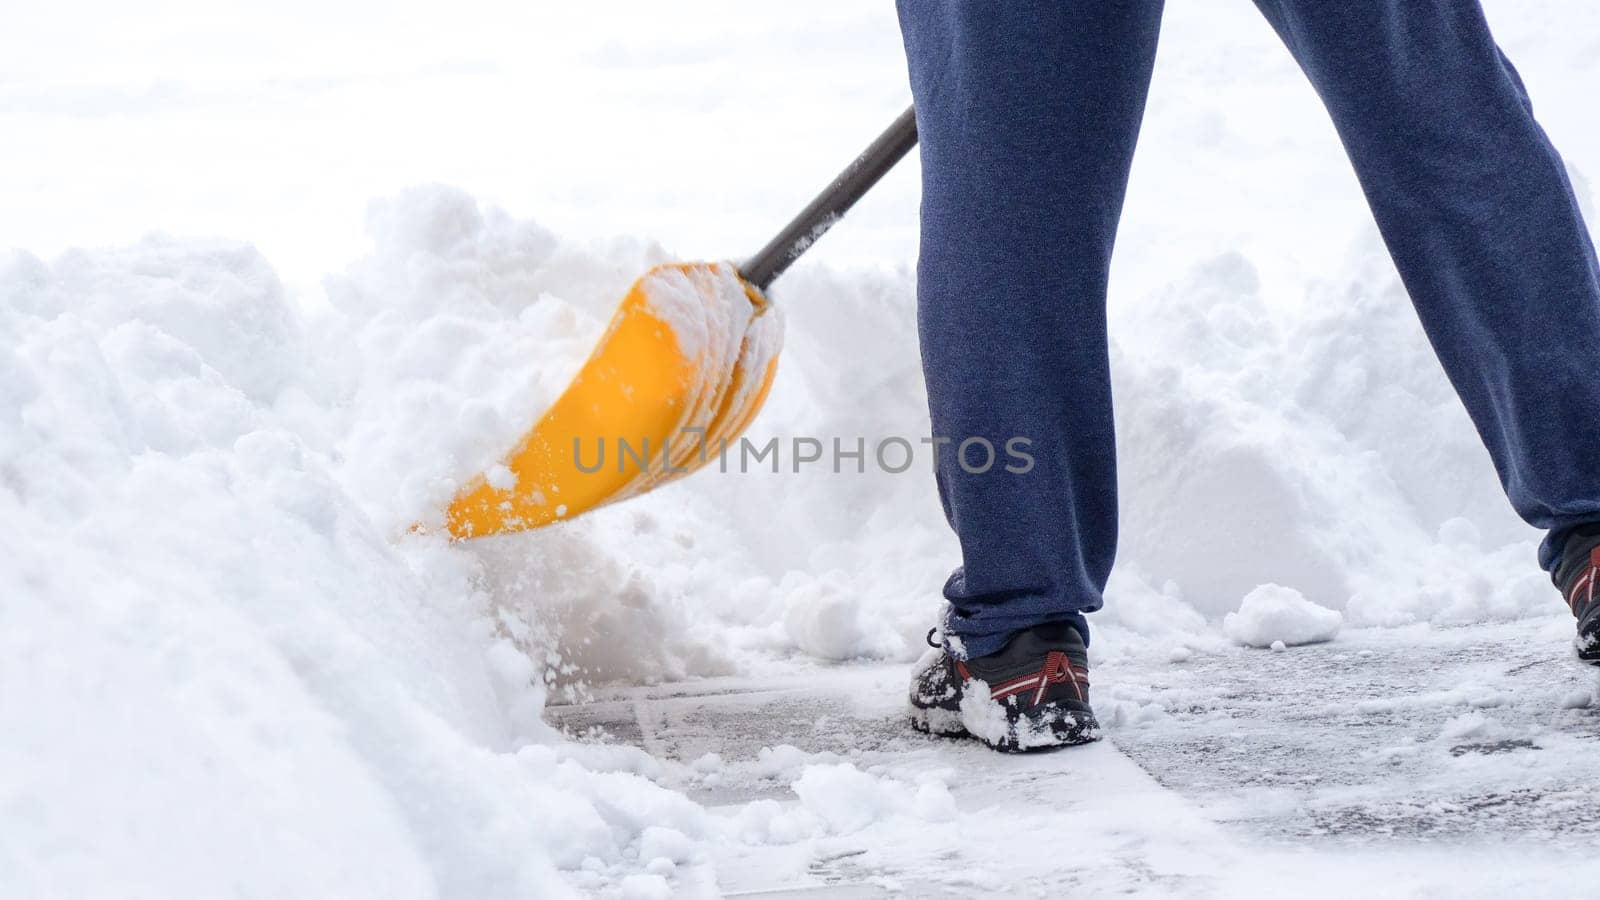 Man shoveling snow off of his driveway after a winter storm in Canada. Man with snow shovel cleans sidewalks in winter. Winter time